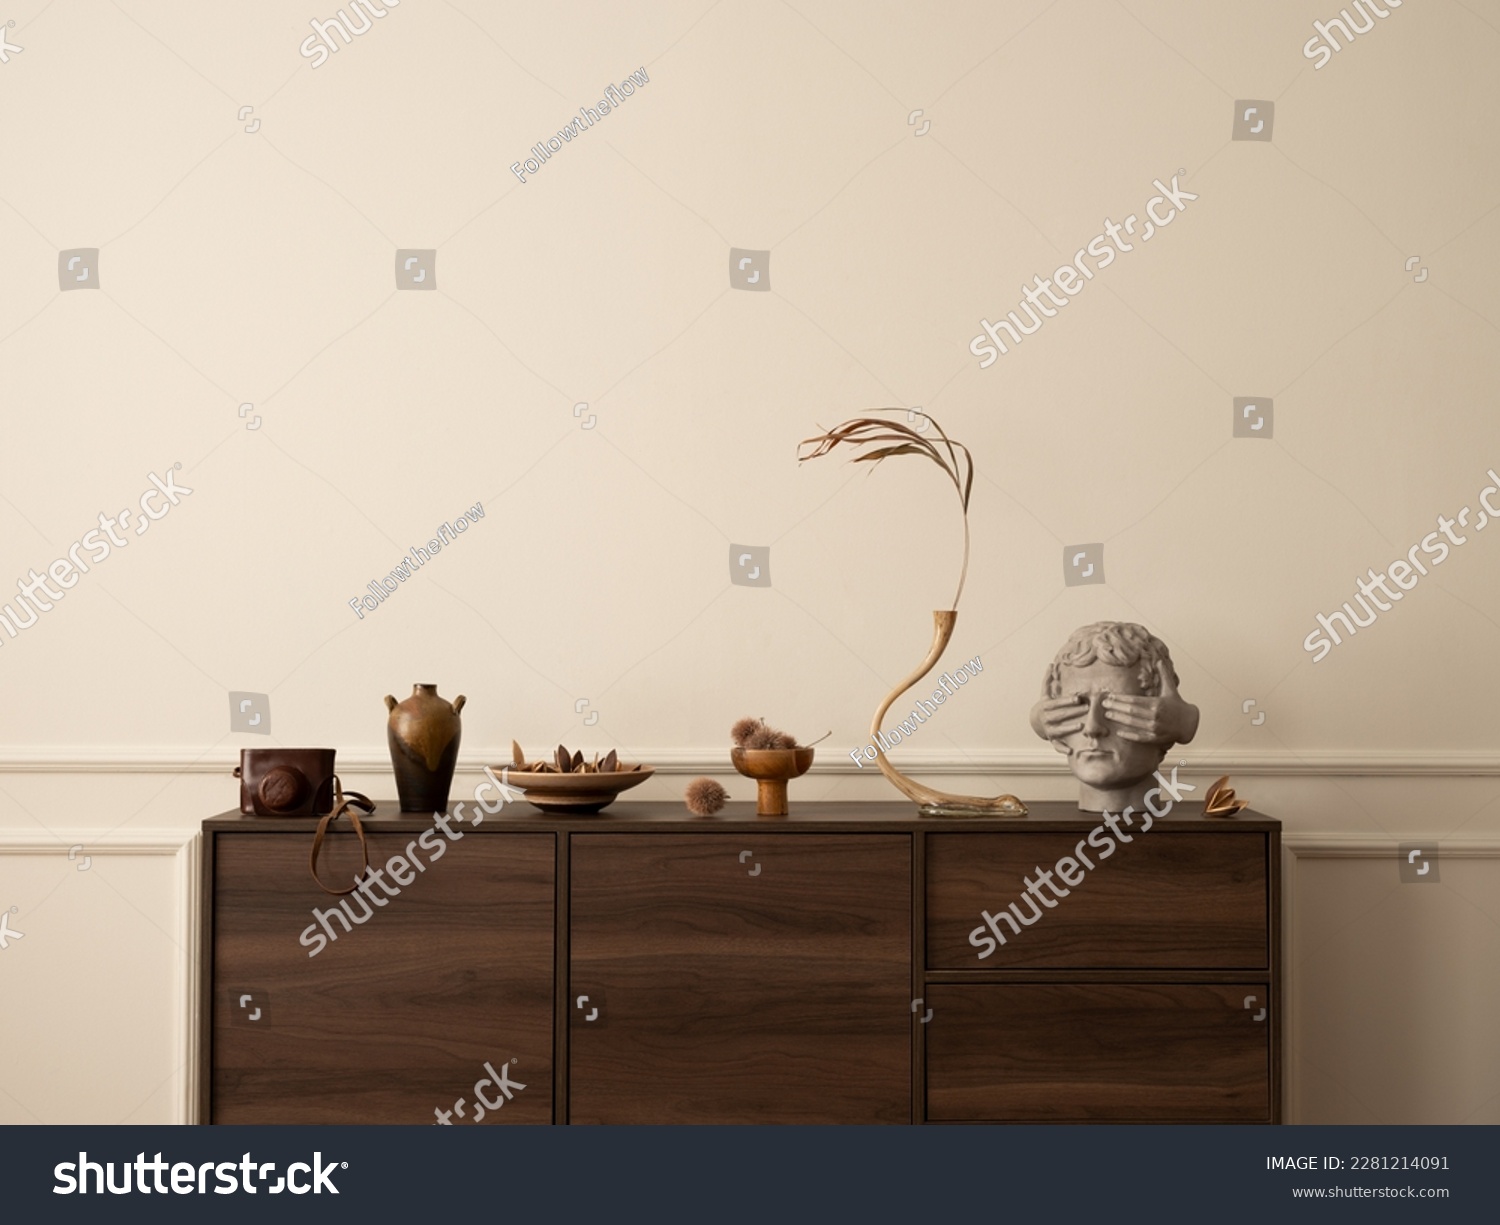 Aesthetic composition of living room interior with wooden sideboard, glass vase with dried flowers, modern sculpture, nuts, wall with stucco and personal accessories. Home decor. Template. #2281214091